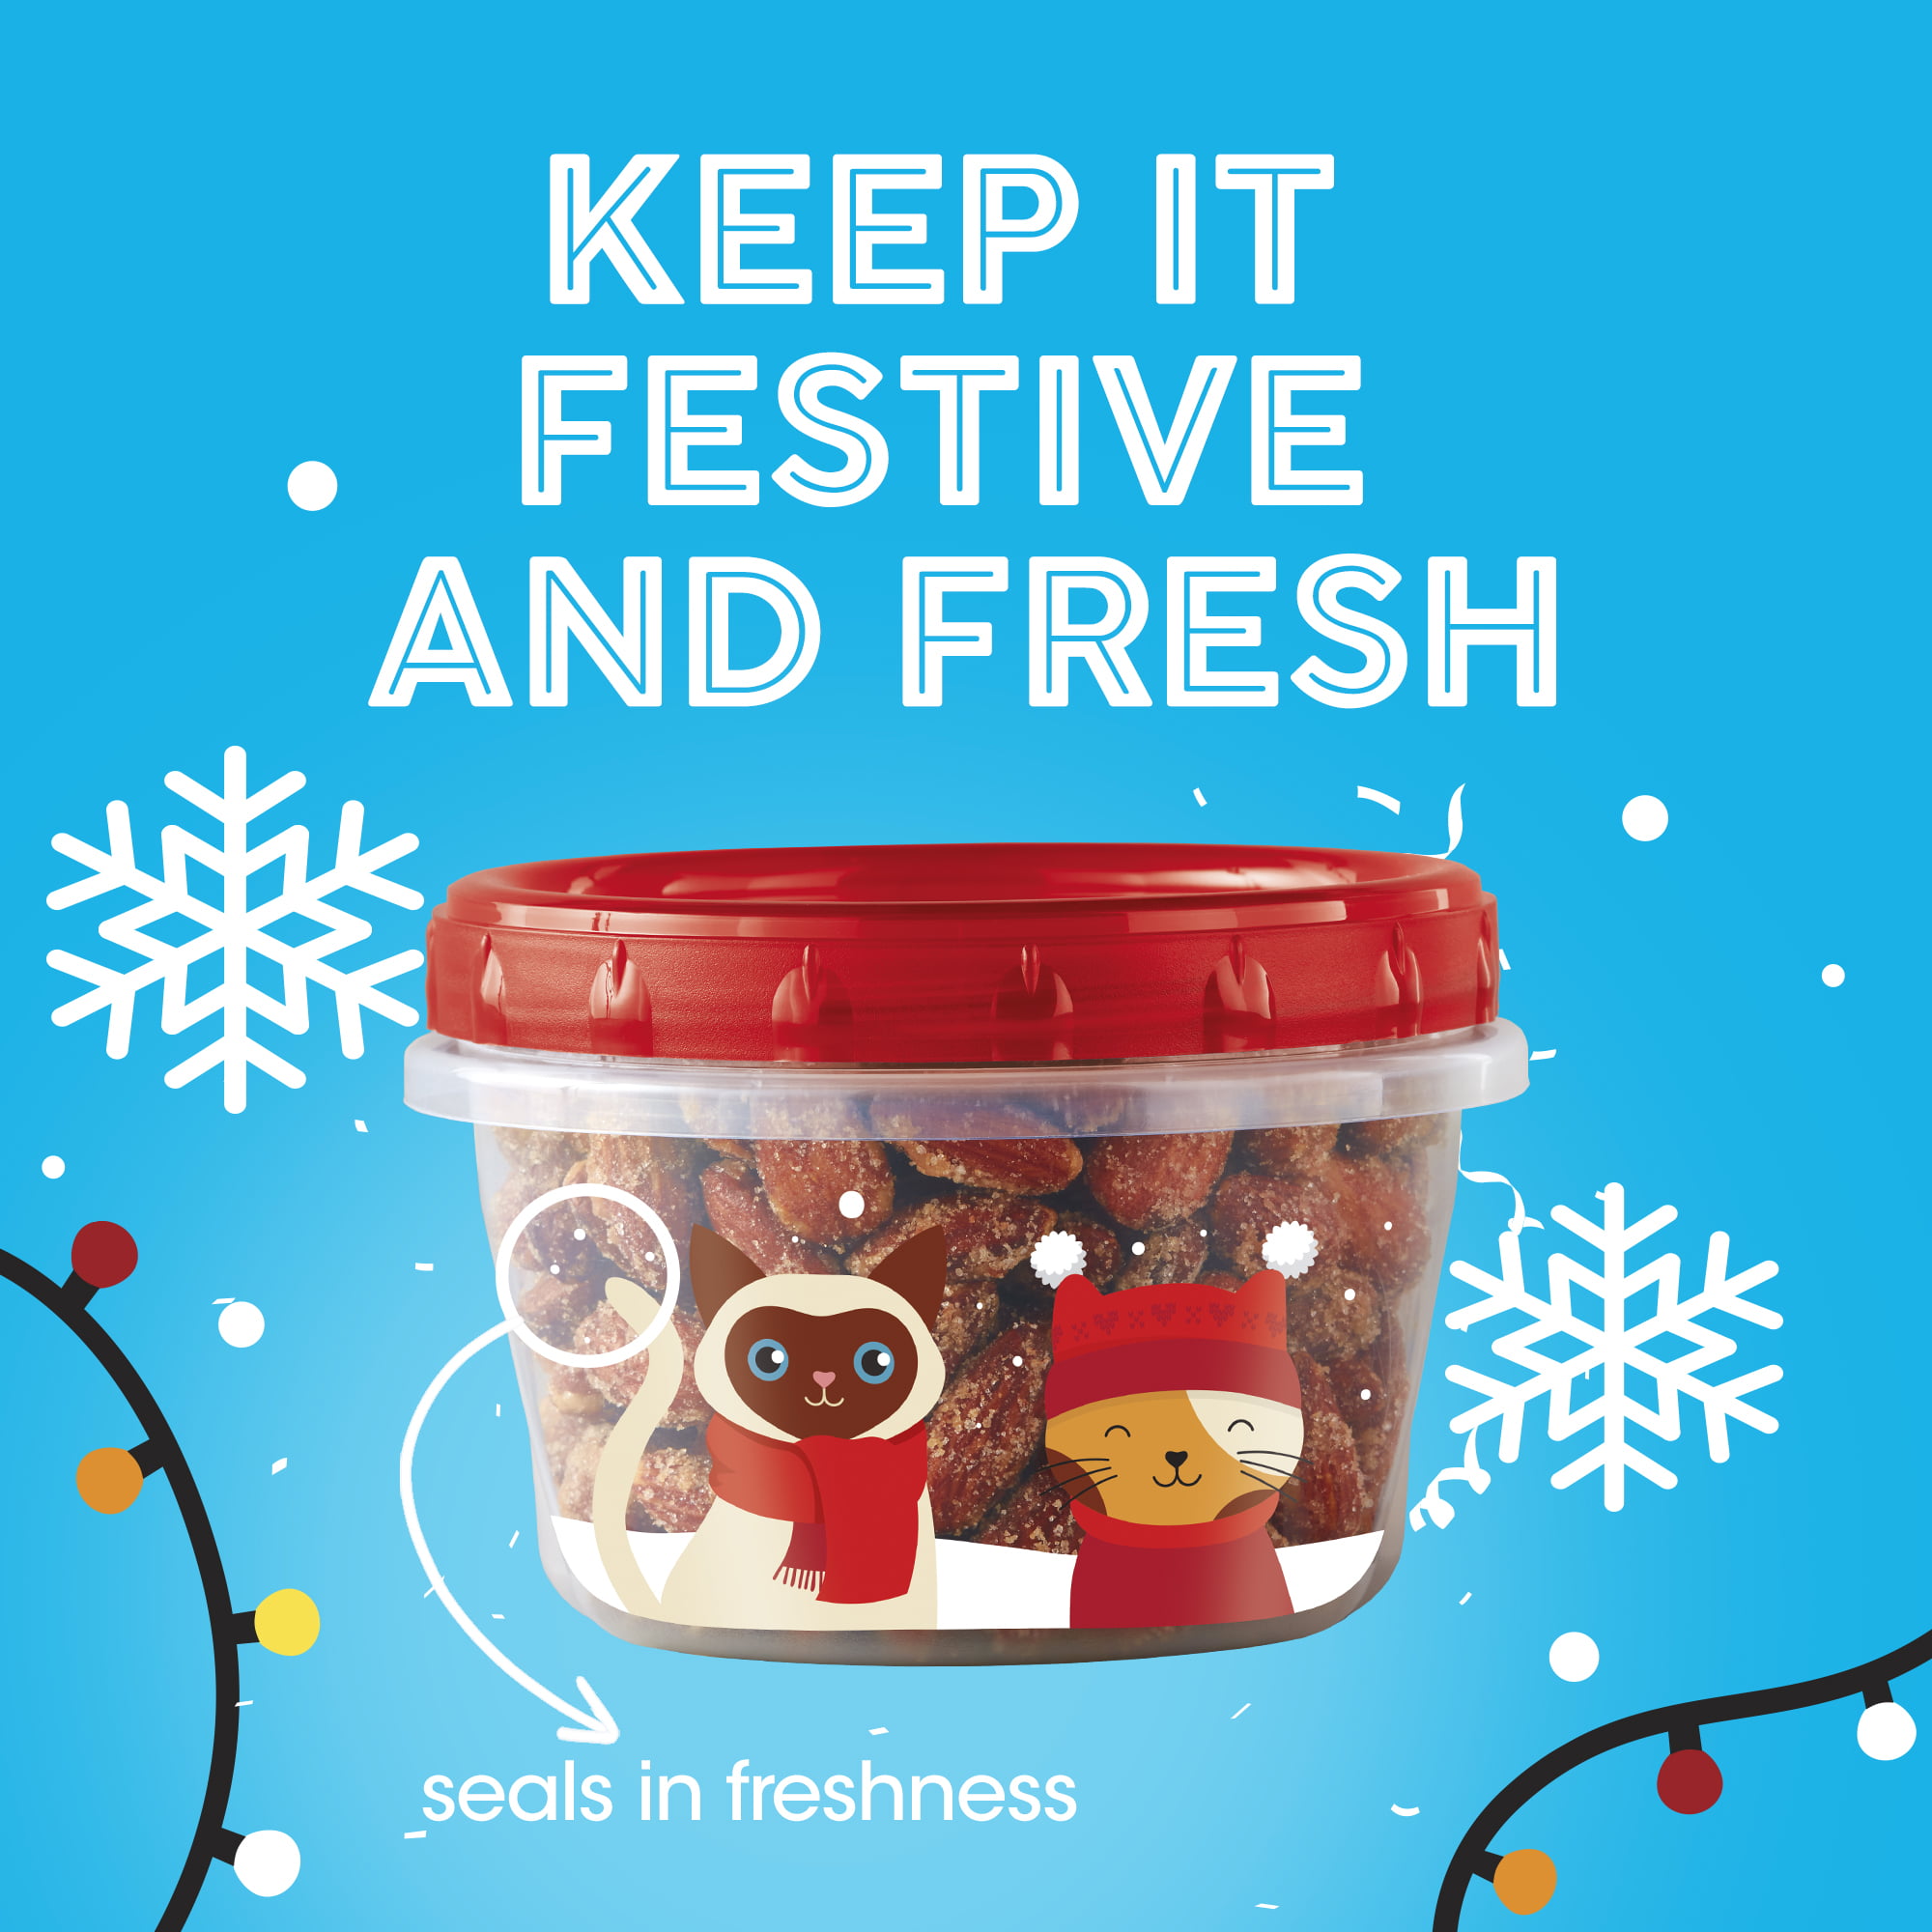 Ziploc Limited Edition Holiday Design Small Round Containers